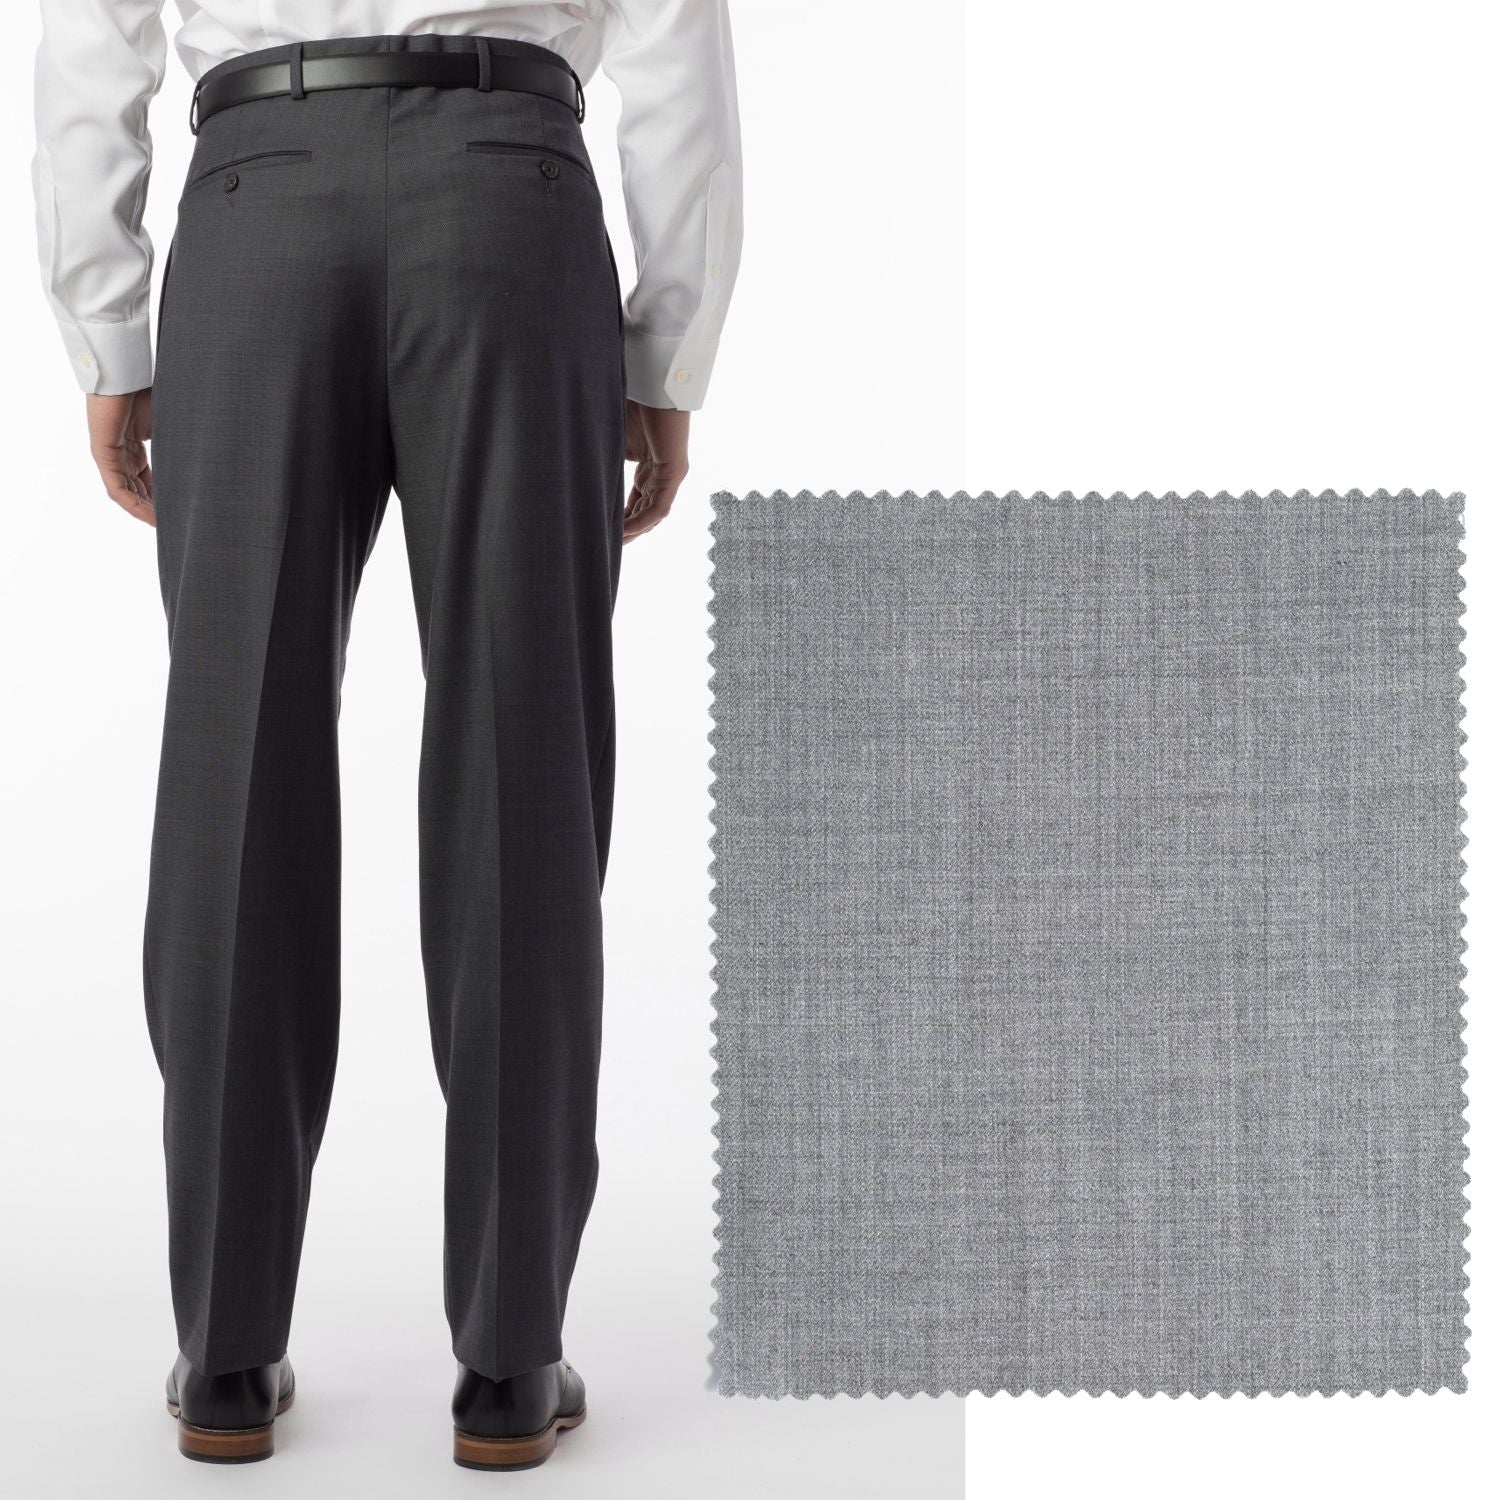 Super 120s Luxury Wool Serge Comfort-EZE Trouser in Light Grey (Manchester Pleated Model) by Ballin